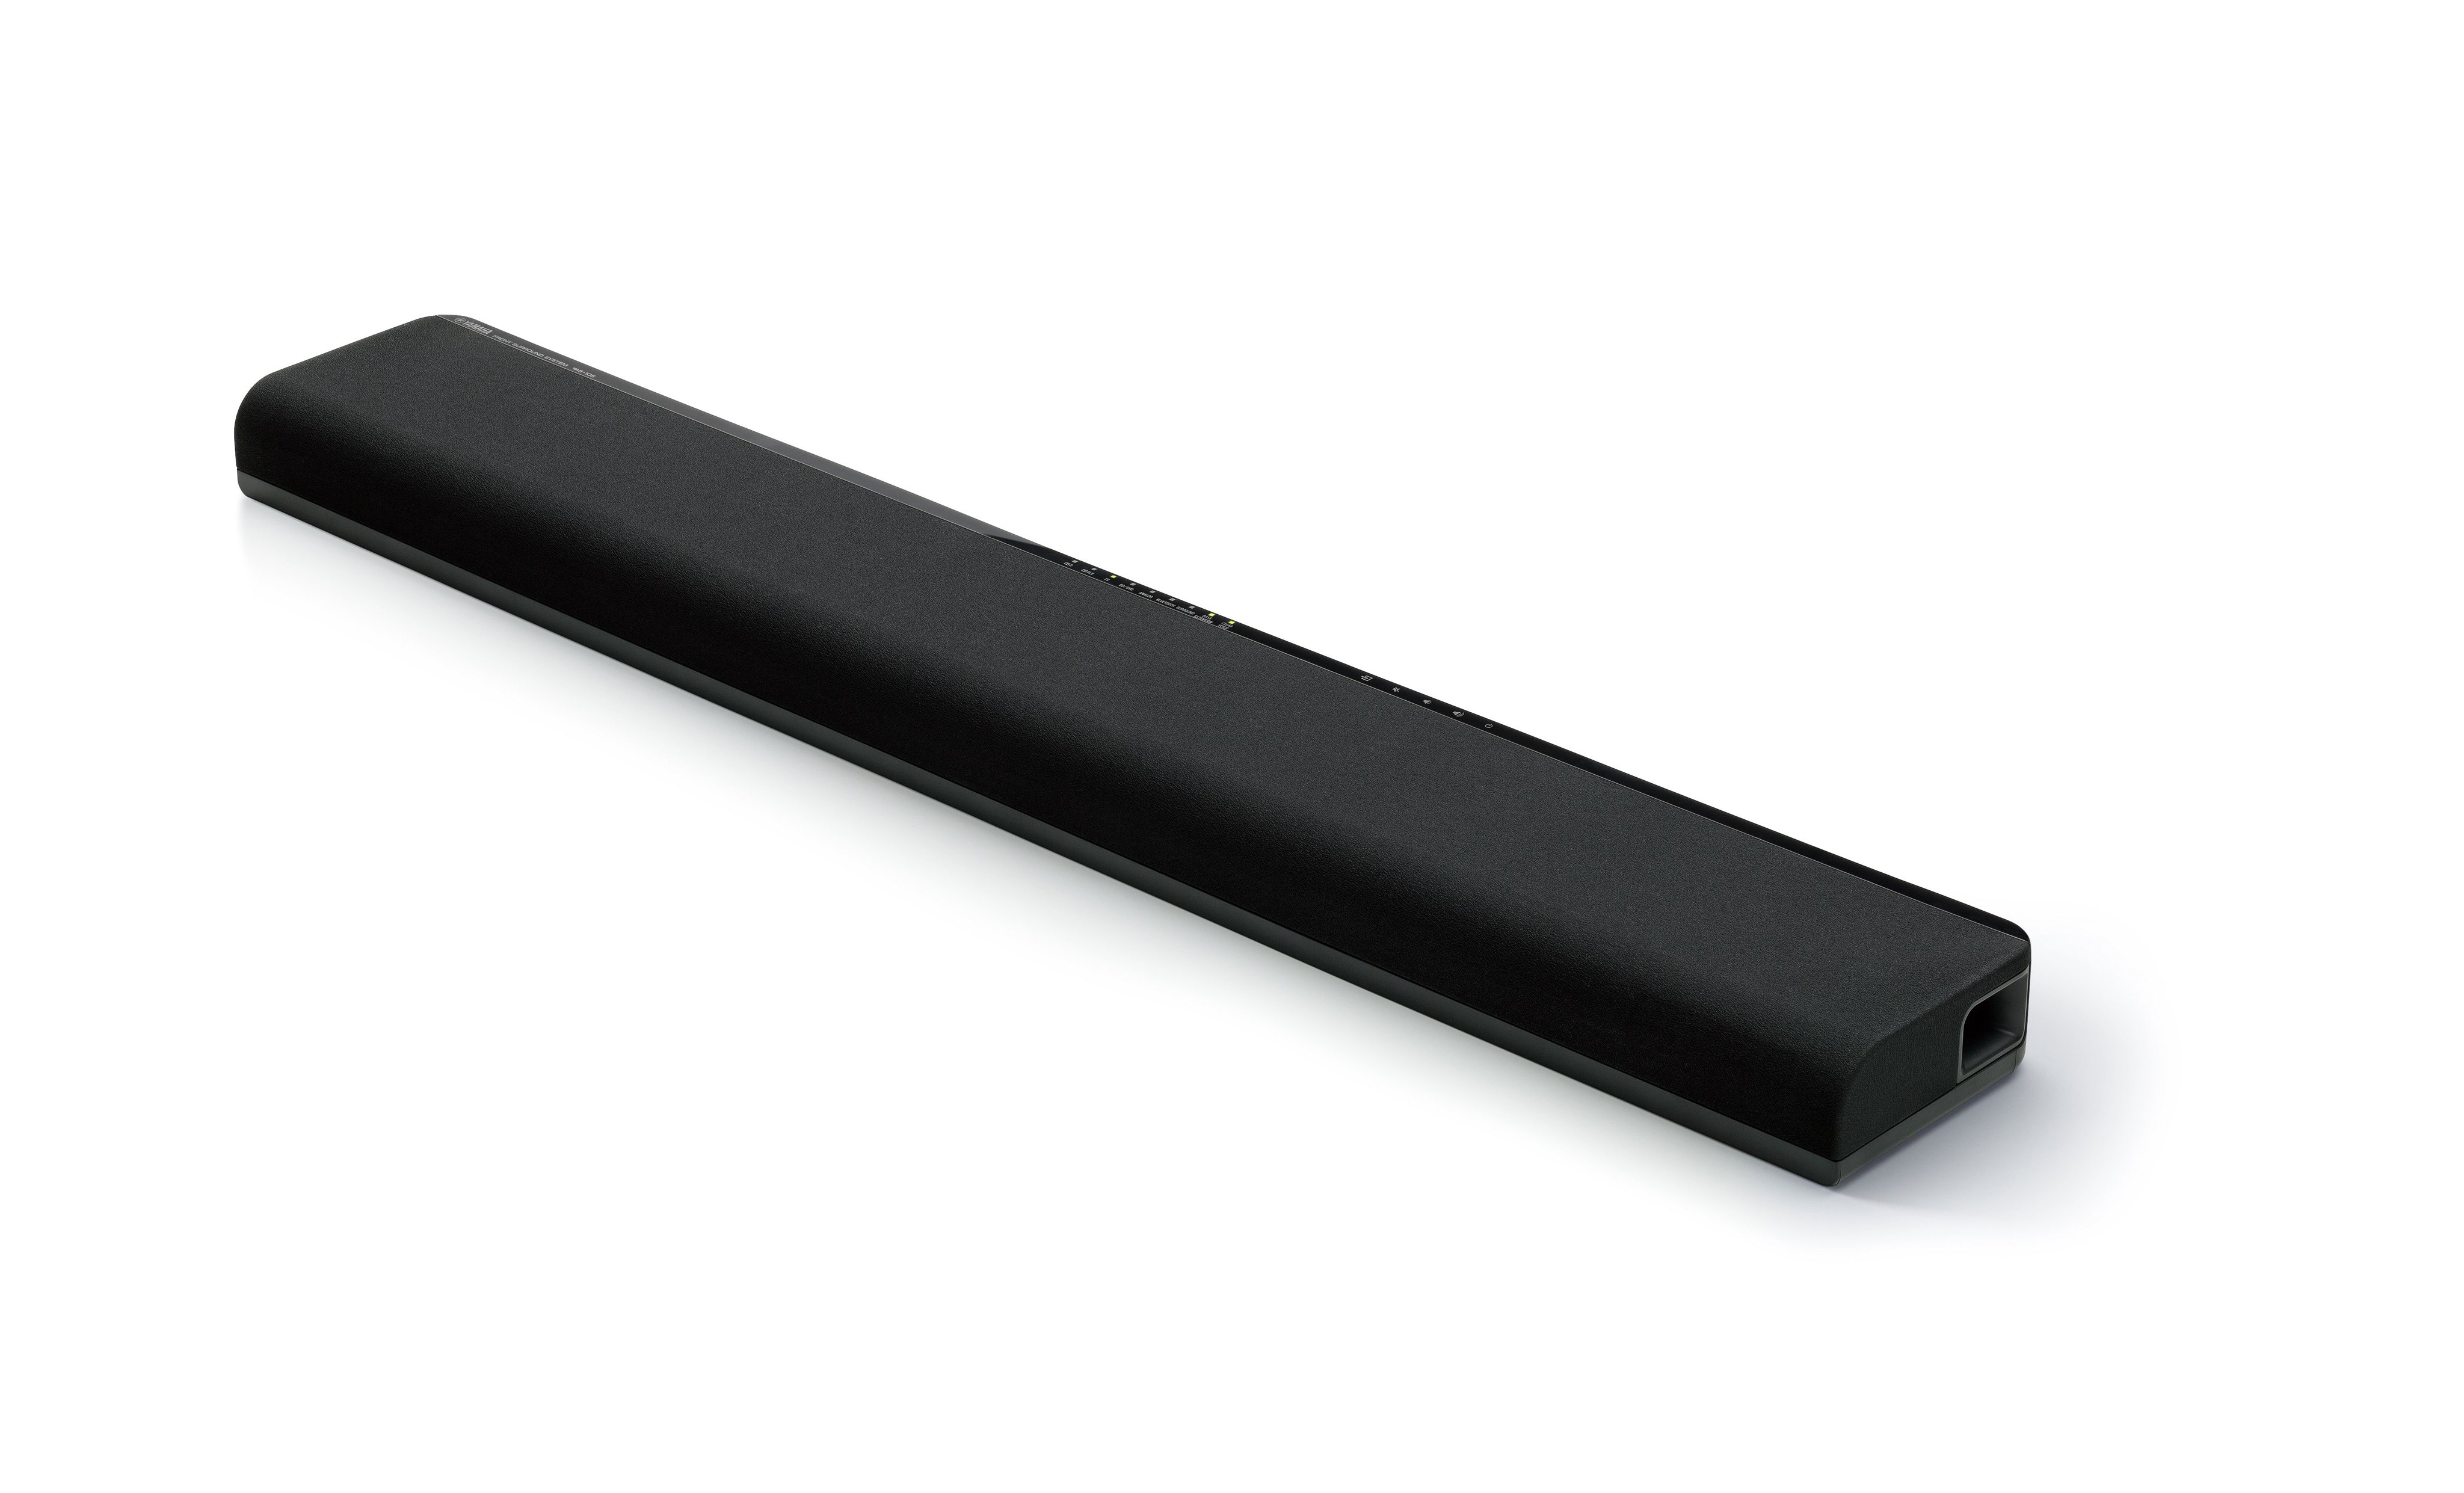 YAS-105 - Overview - Sound Bar - Audio 